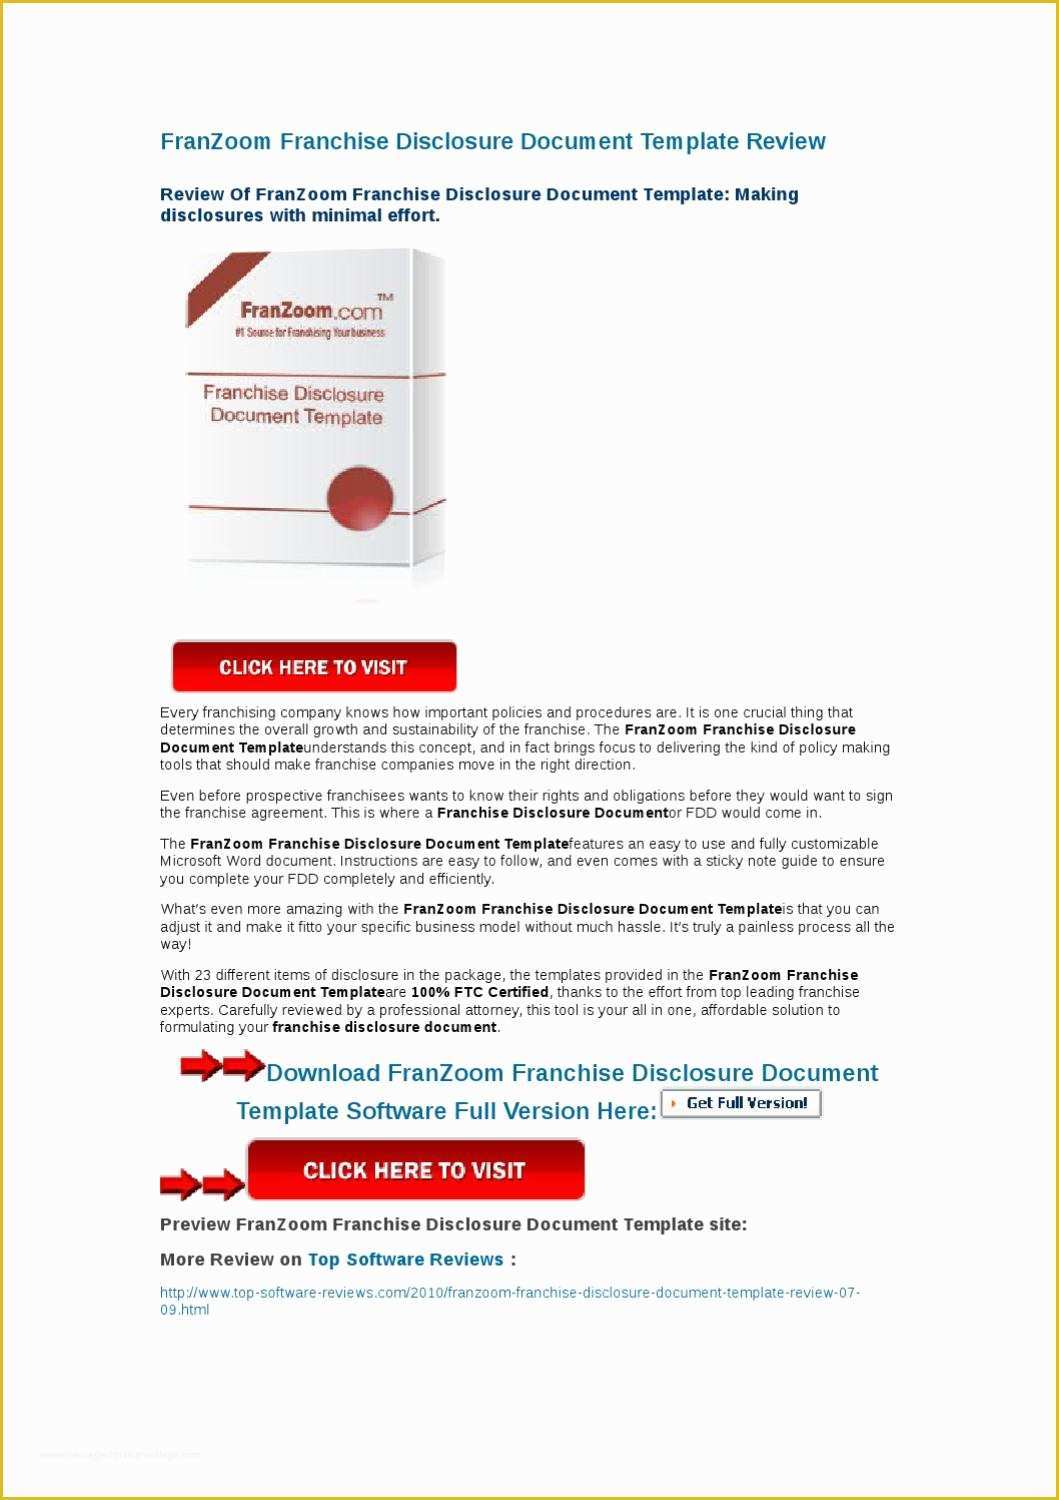 Franchise Disclosure Document Template Free Of Franzoom Franchise Disclosure Document Template Review by